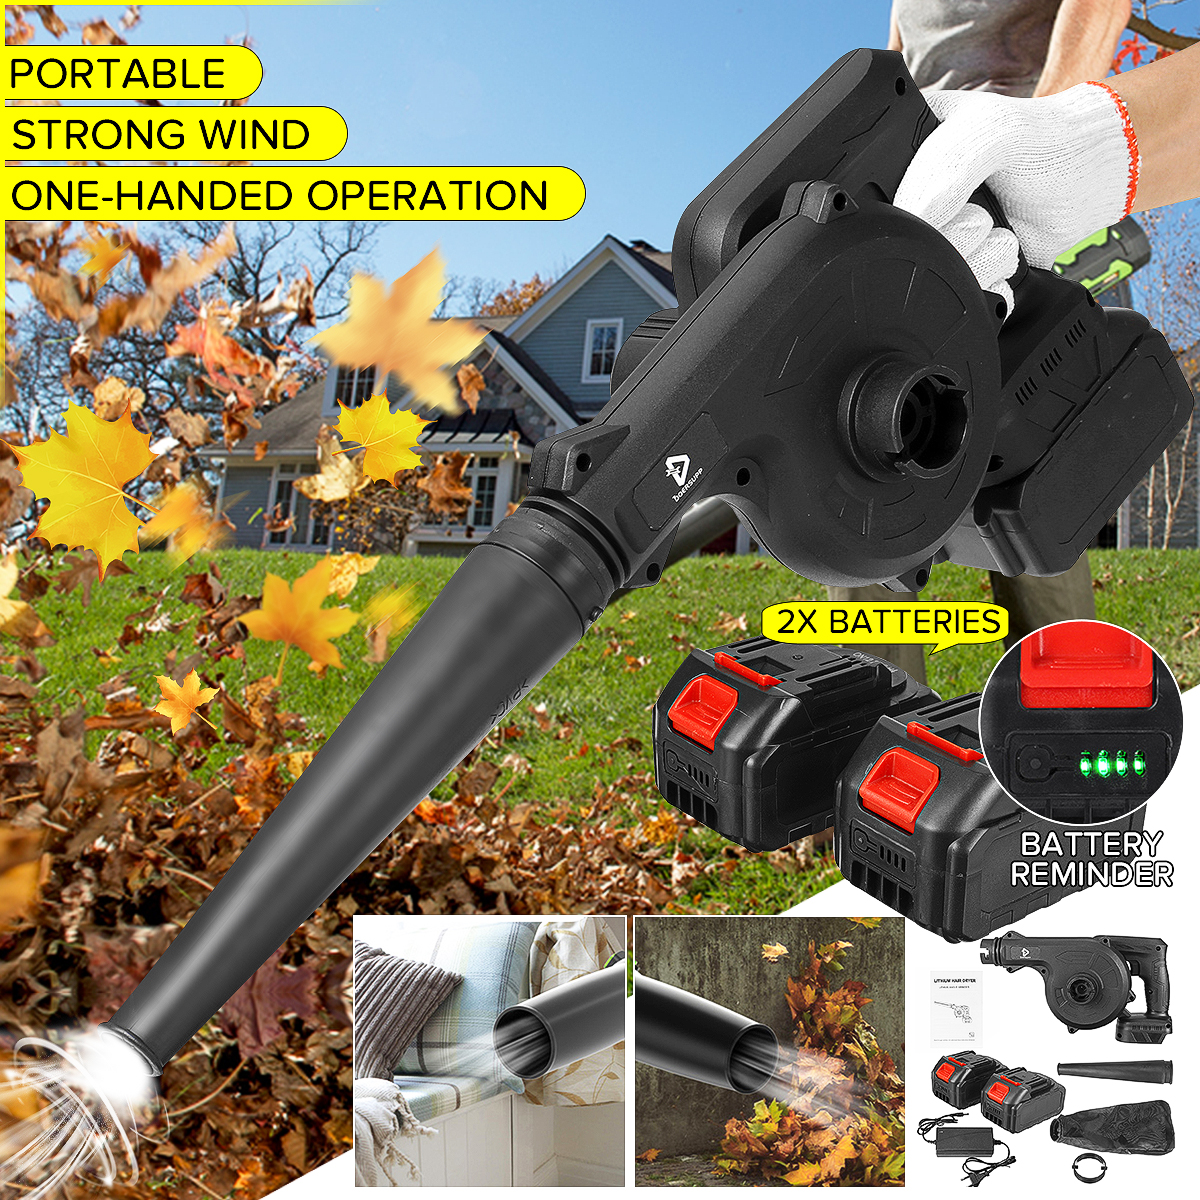 Doersupp-21V-1000W-Cordless-Electric-Air-Blower-Vacuum-Suction-Cleaning-Leaf-Blower-Computer-Dust-Co-1863319-1